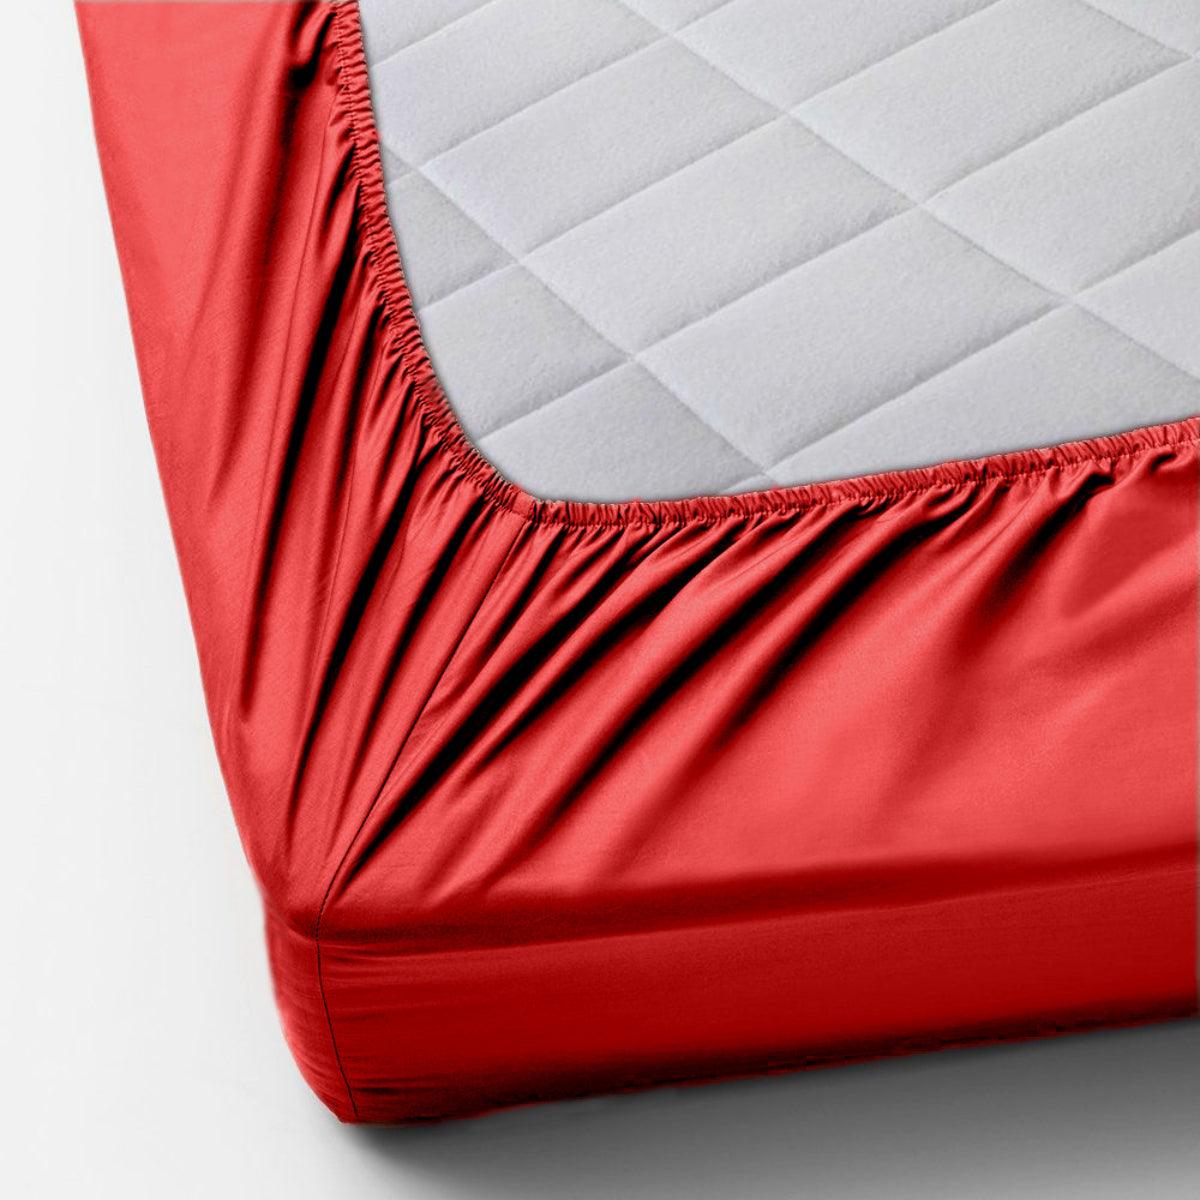 YNOT Crispy Cotton Matras Hoeslaken Rood - Y-NOT | be different